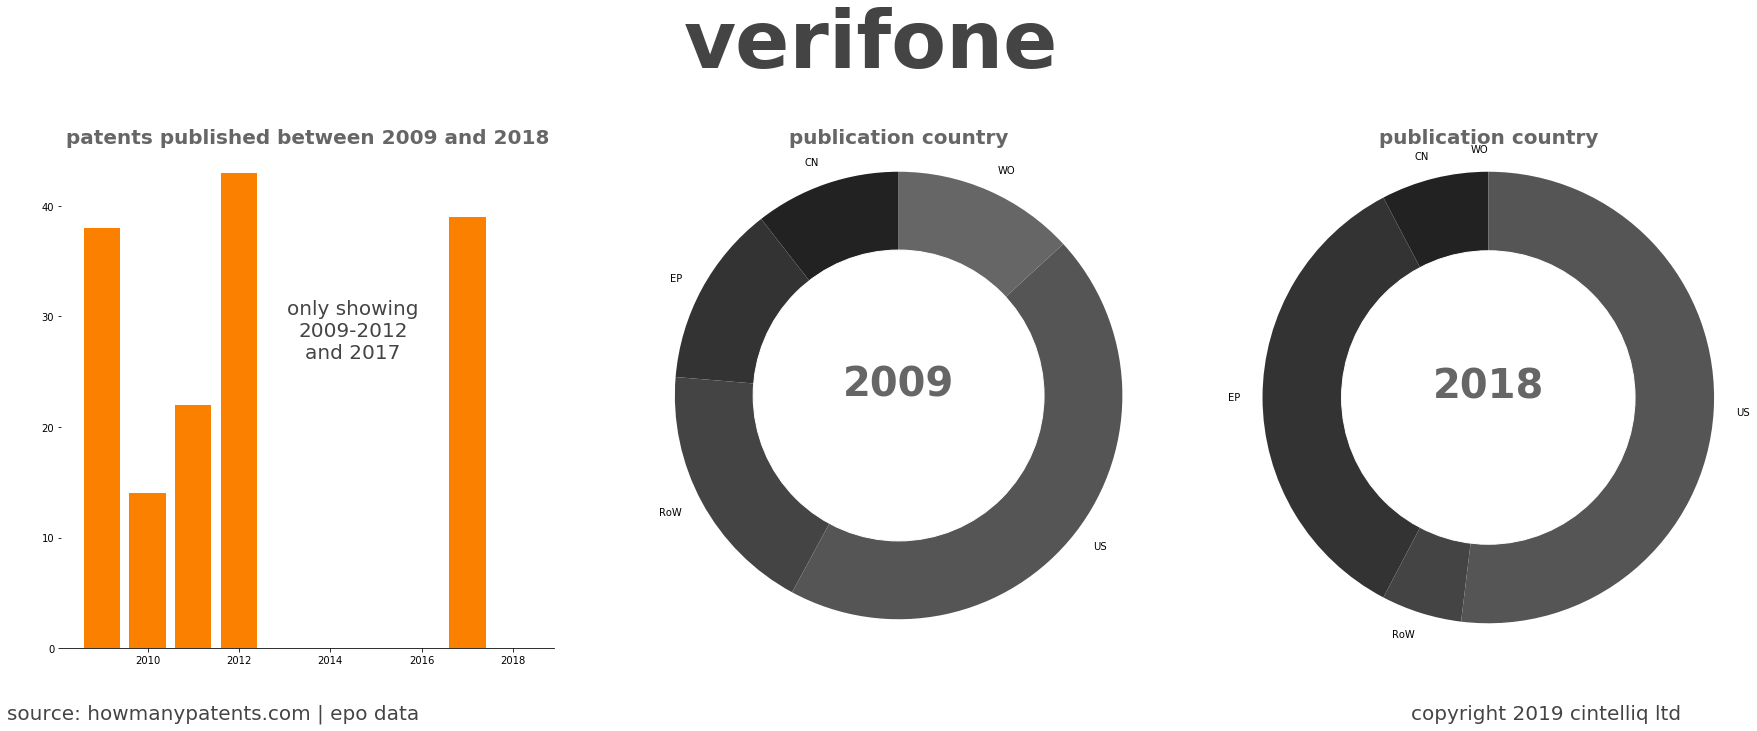 summary of patents for Verifone